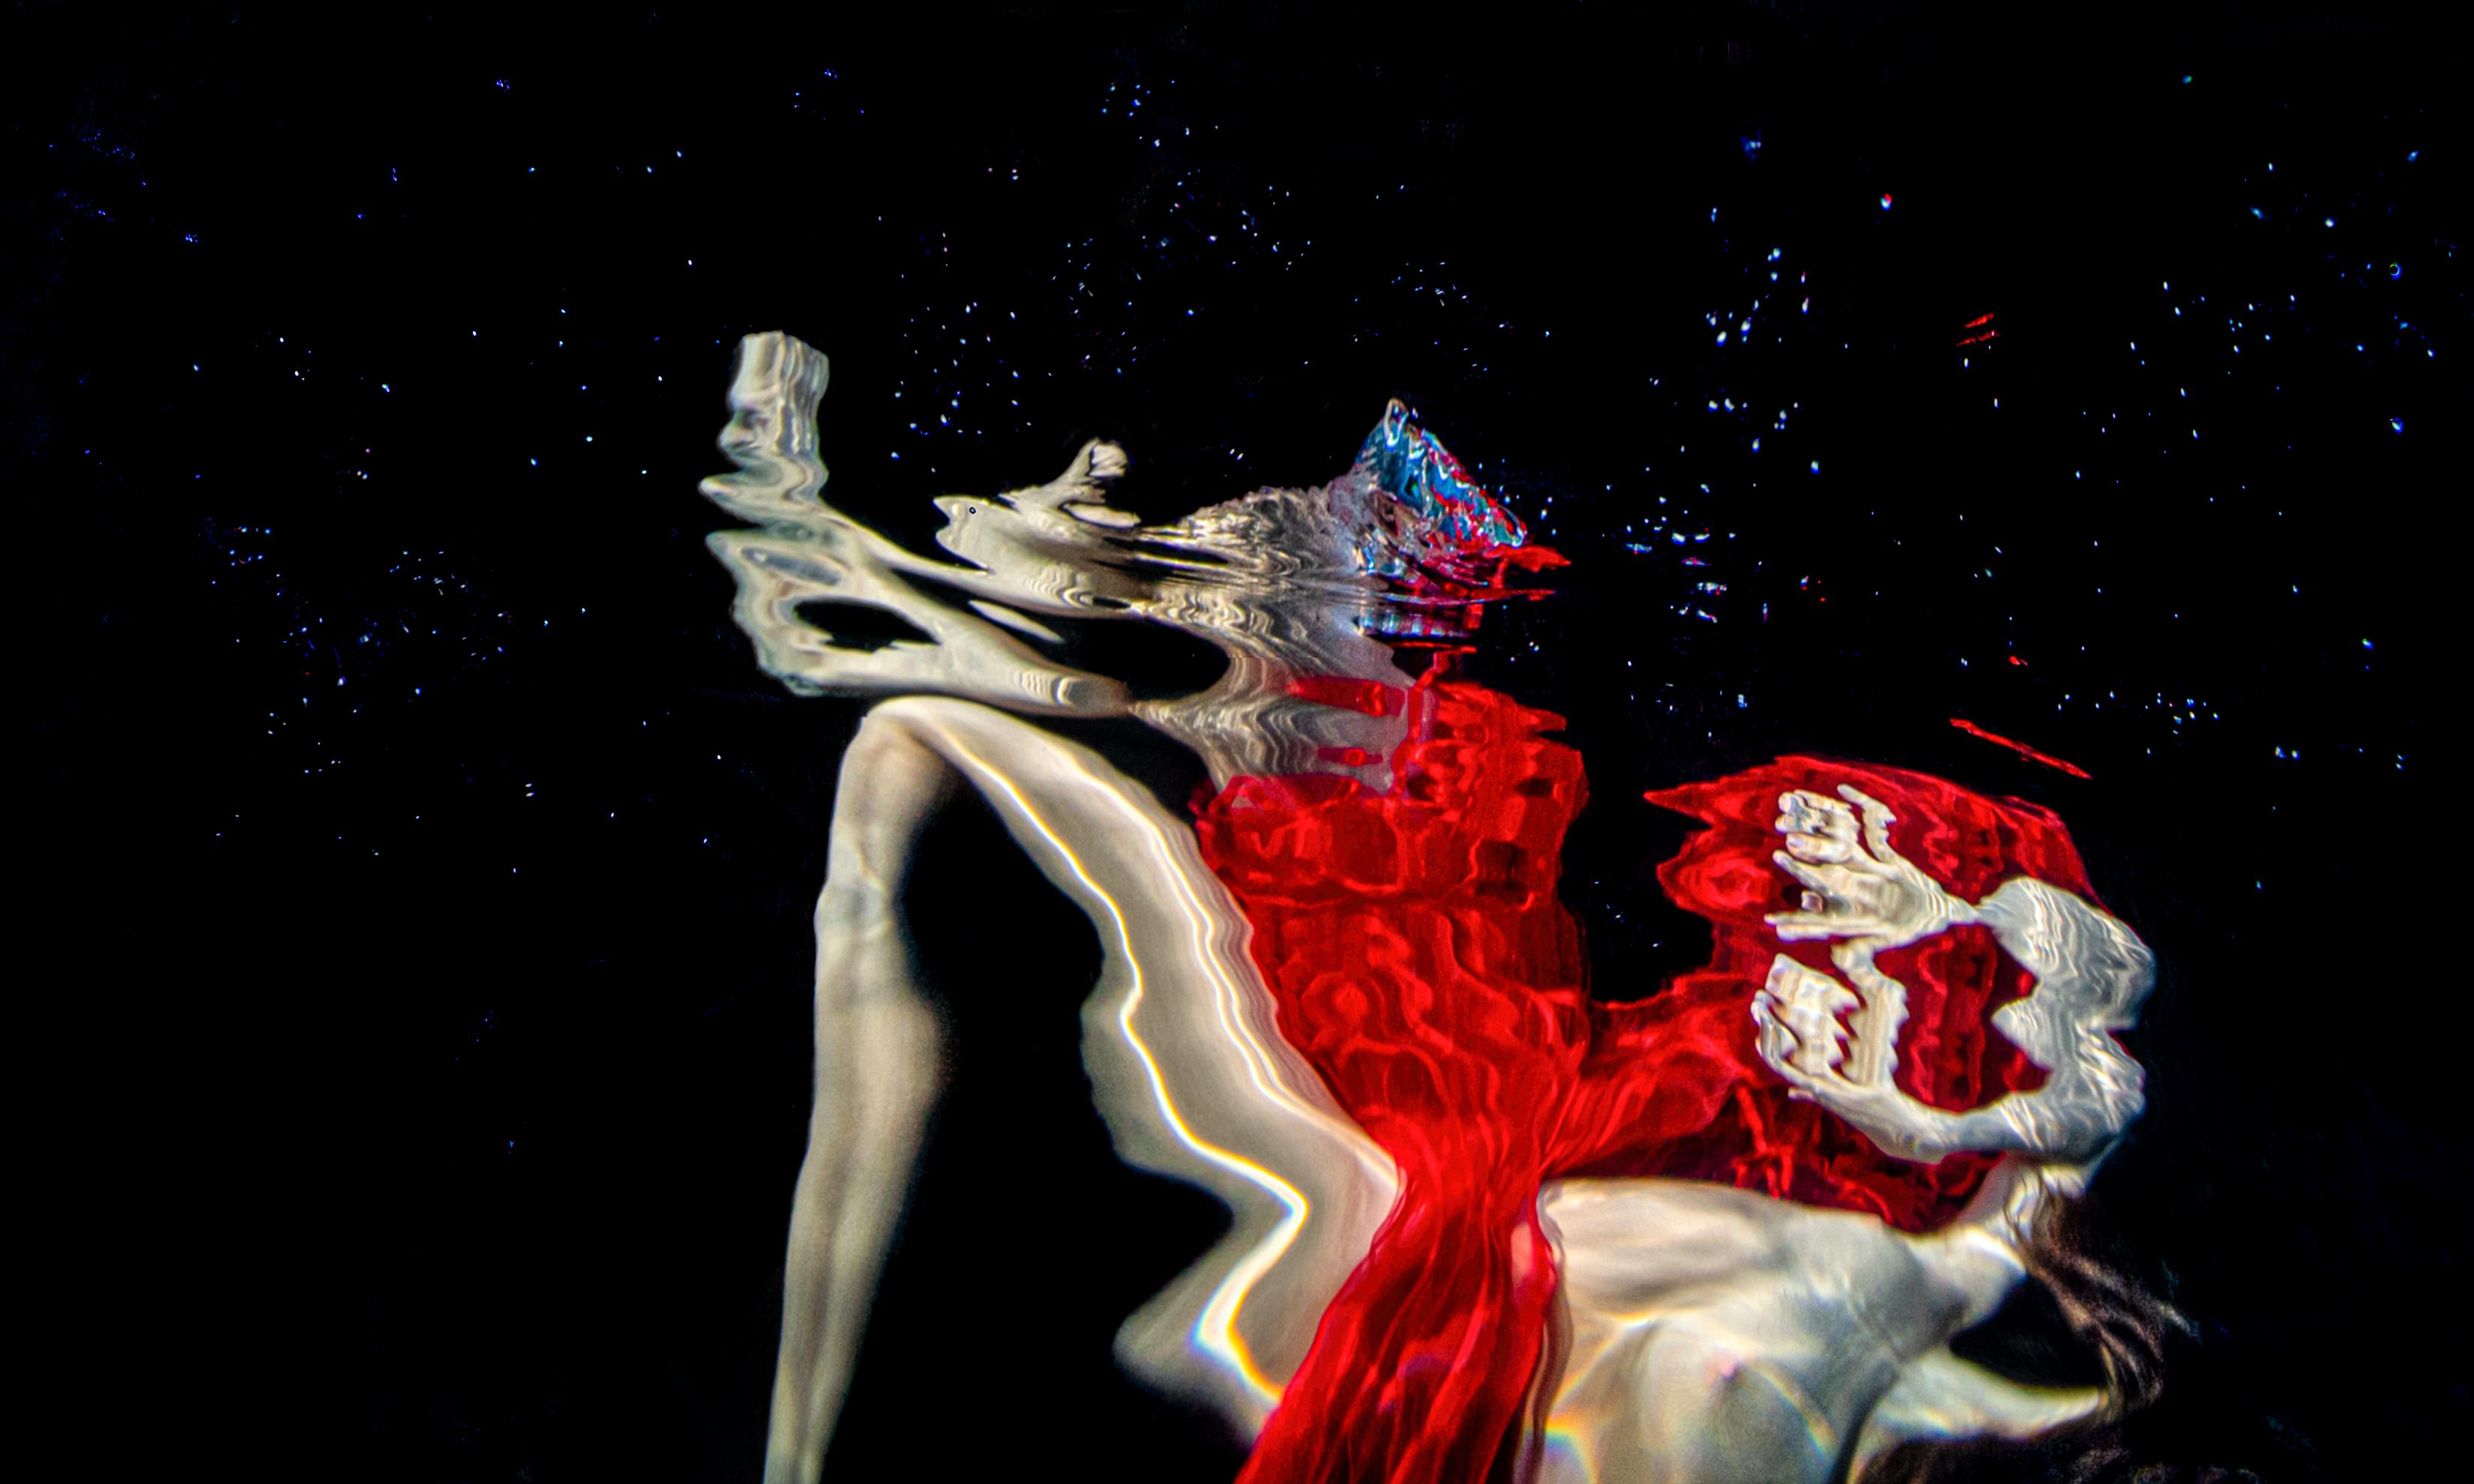 Alex Sher Abstract Photograph - Her Own Universe - underwater nude photo - series REFLECTIONS - 14x24"